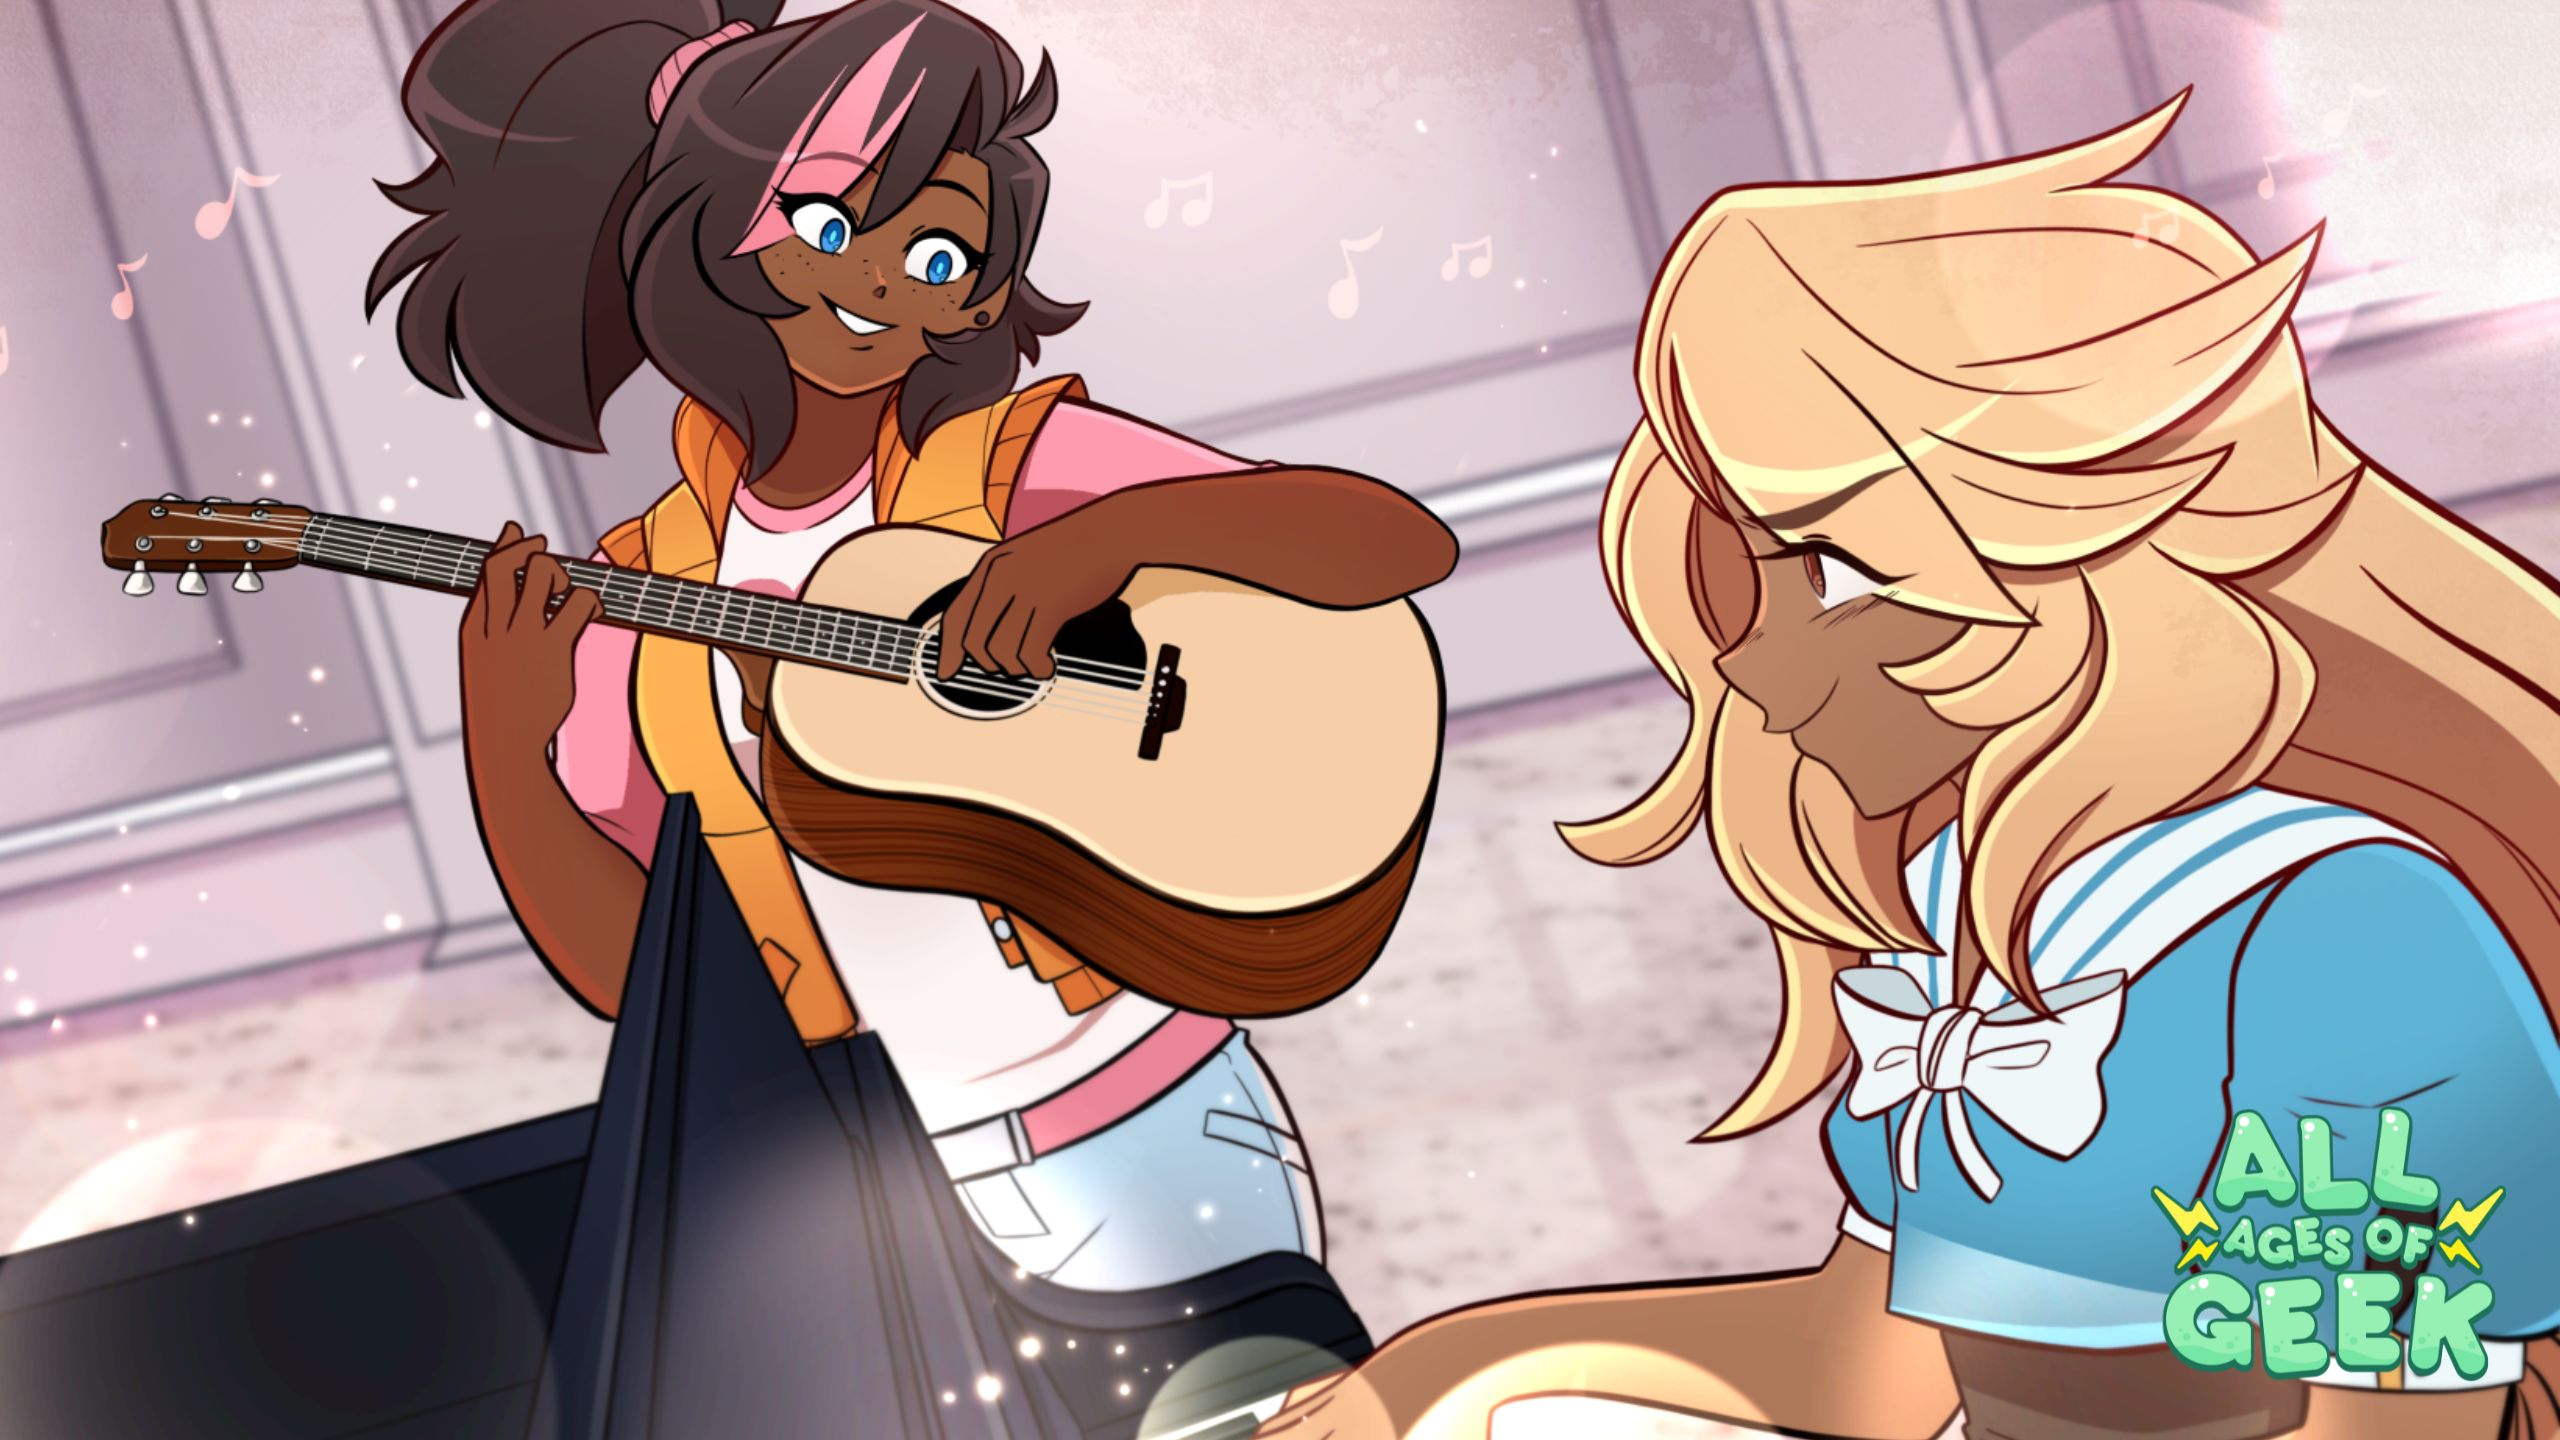 Two women are in a cozy, softly-lit room playing music together. One woman with dark skin and brown hair is smiling and playing an acoustic guitar, while the other woman with light skin and long blonde hair is focused on playing the piano. Musical notes float around them, adding to the warm and harmonious atmosphere. Love's Crescendo_All_Ages_Of_Geek